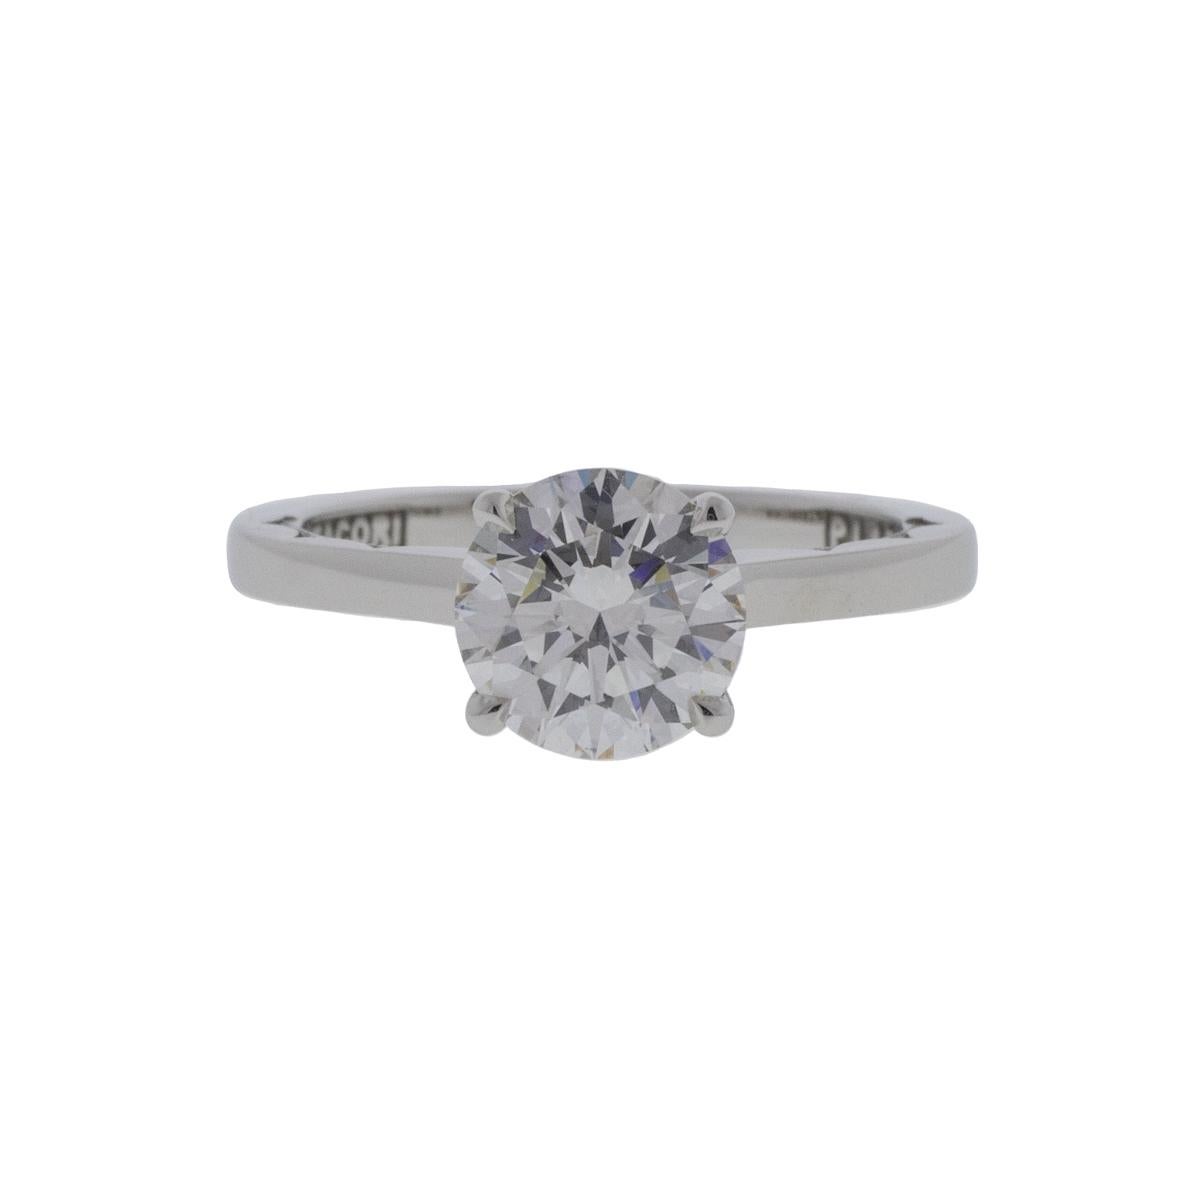 This platinum Tacori round brilliant diamond ring is a timeless symbol of love and commitment. Its 1.13ct F color VS1 clarity diamond gives a brilliant sparkle within an elegant 4-prong setting. The band has lovely embellishments to add to the